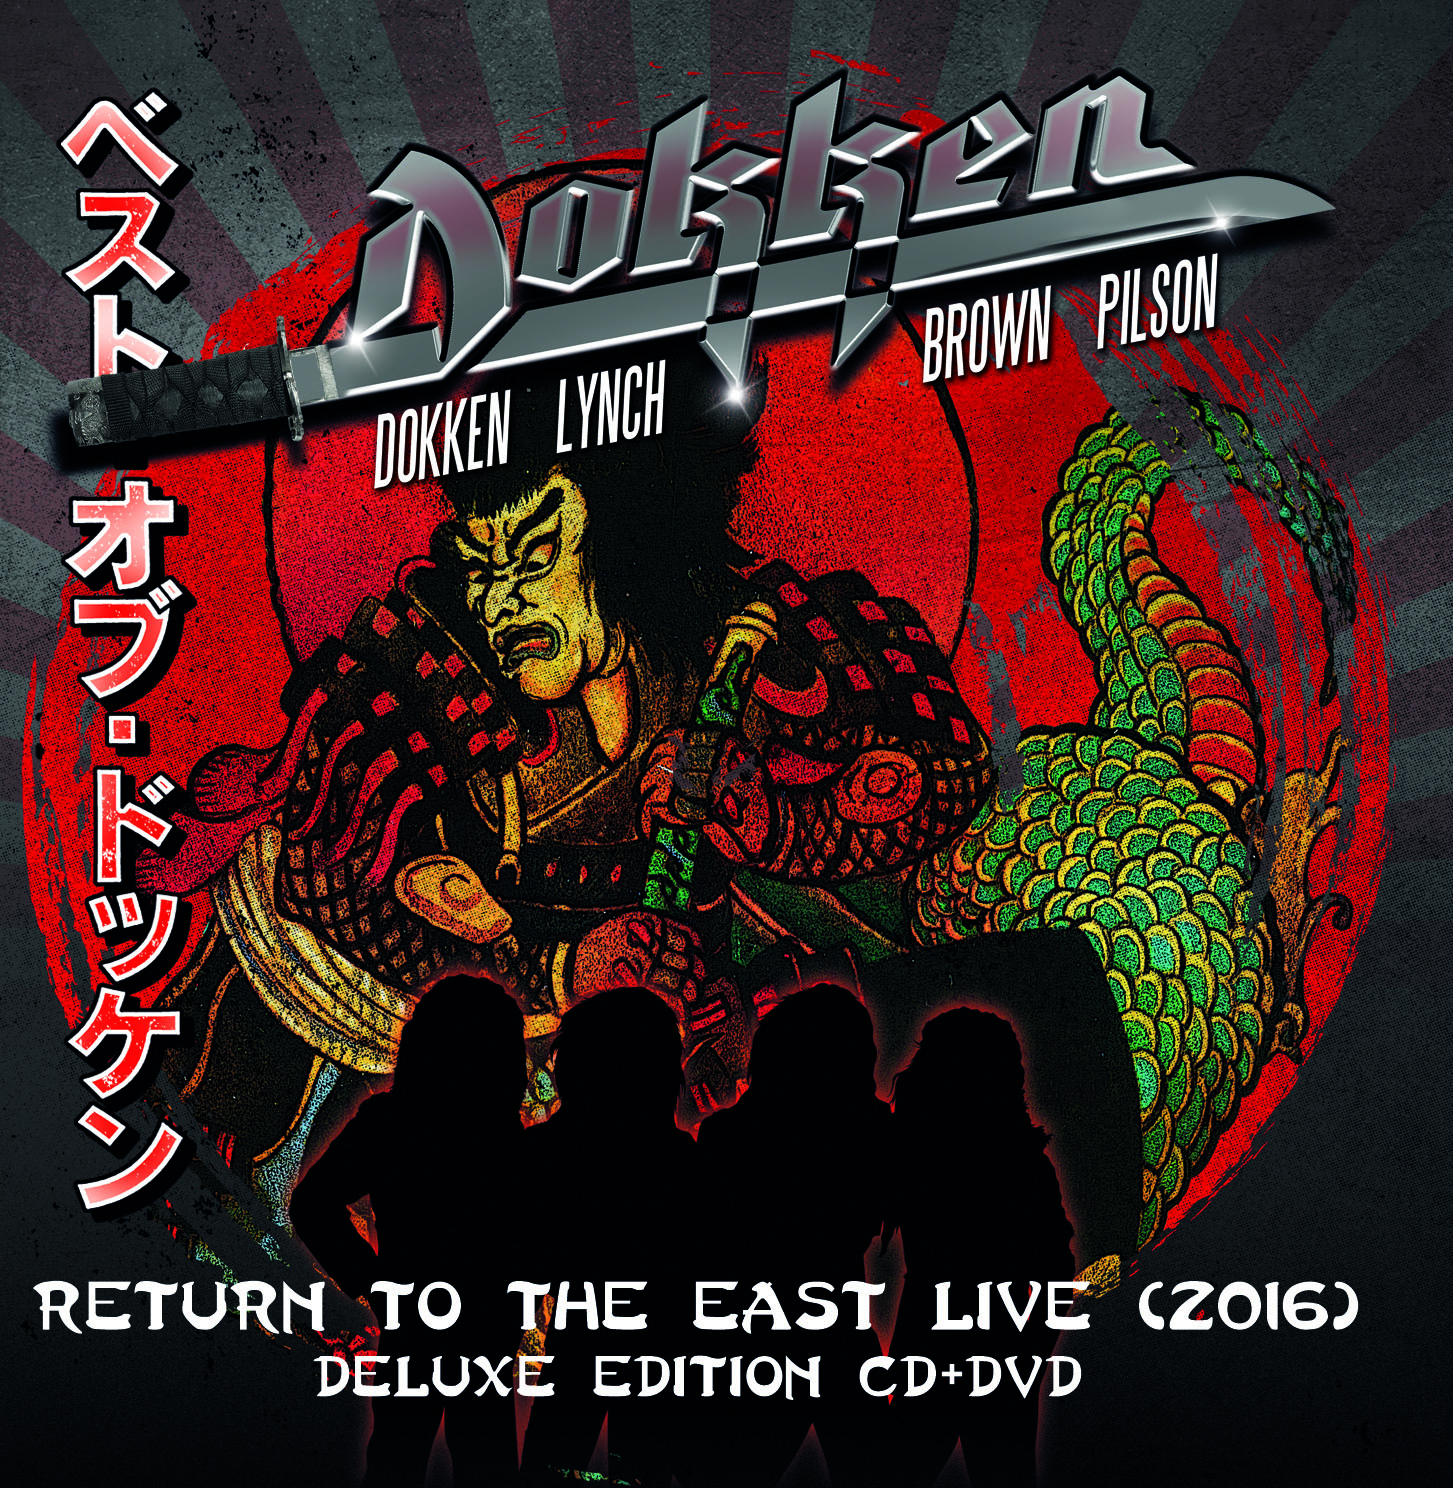 Original DOKKEN Lineup Release Video For New Single "It's Just Another Day"